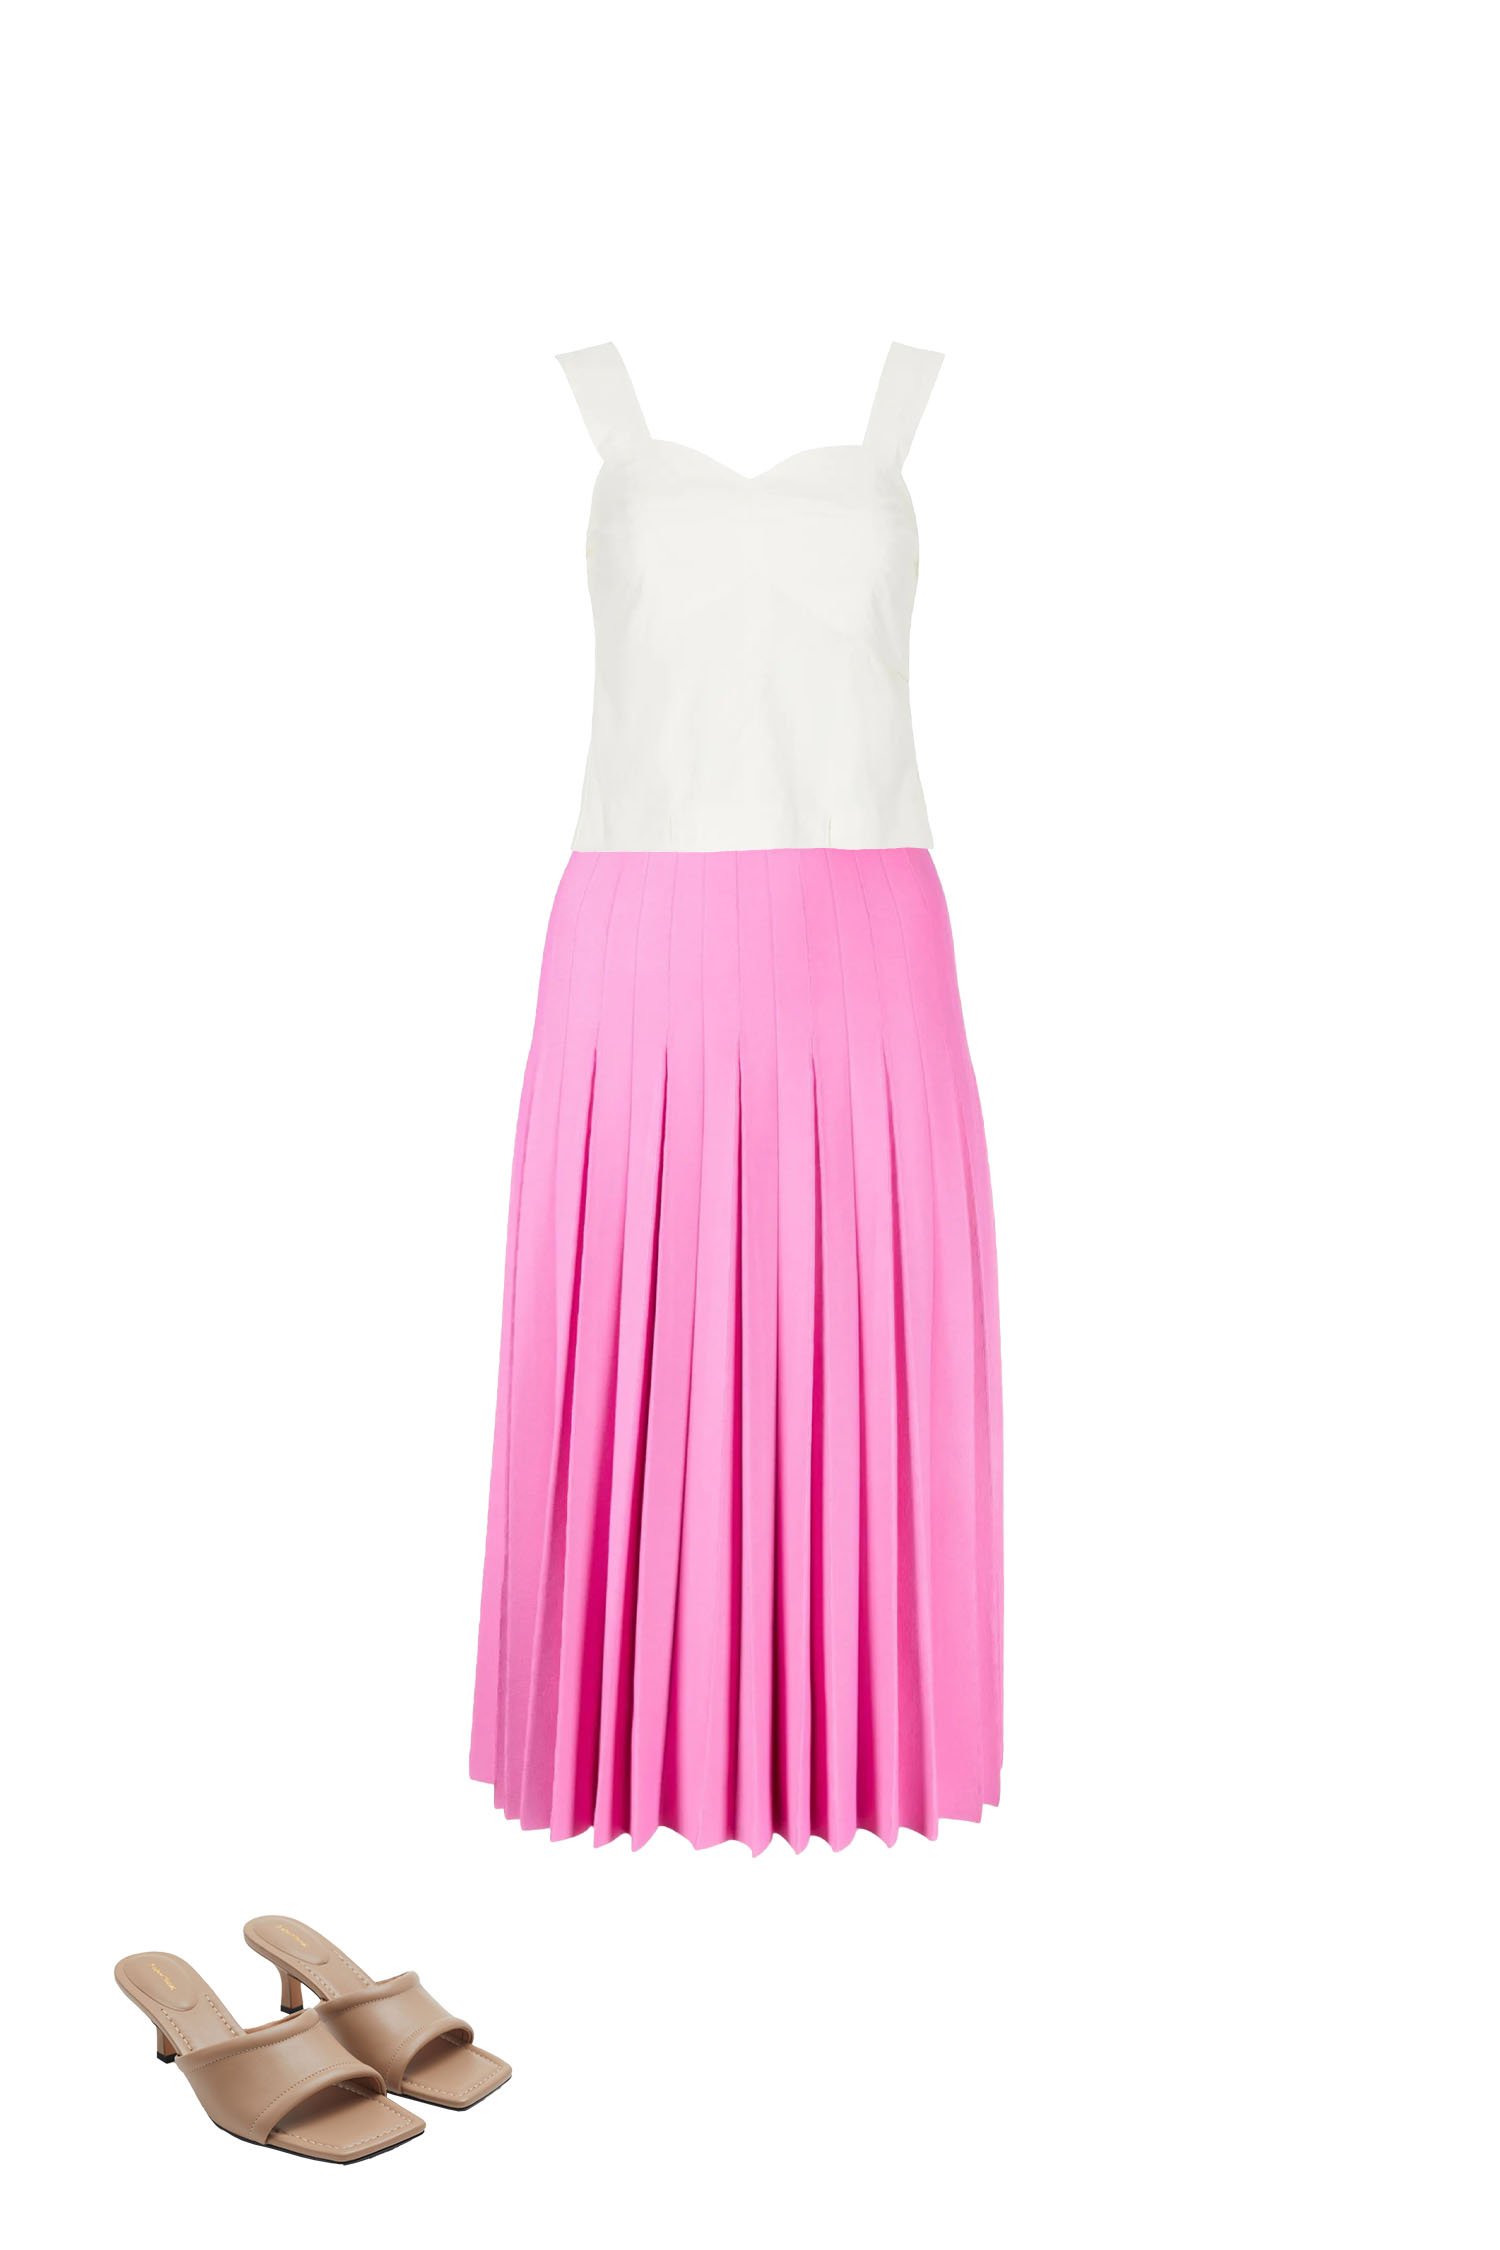 White Sweetheart Neckline Tank Top with Bubblegum Pink Pleated Skirt Outfit